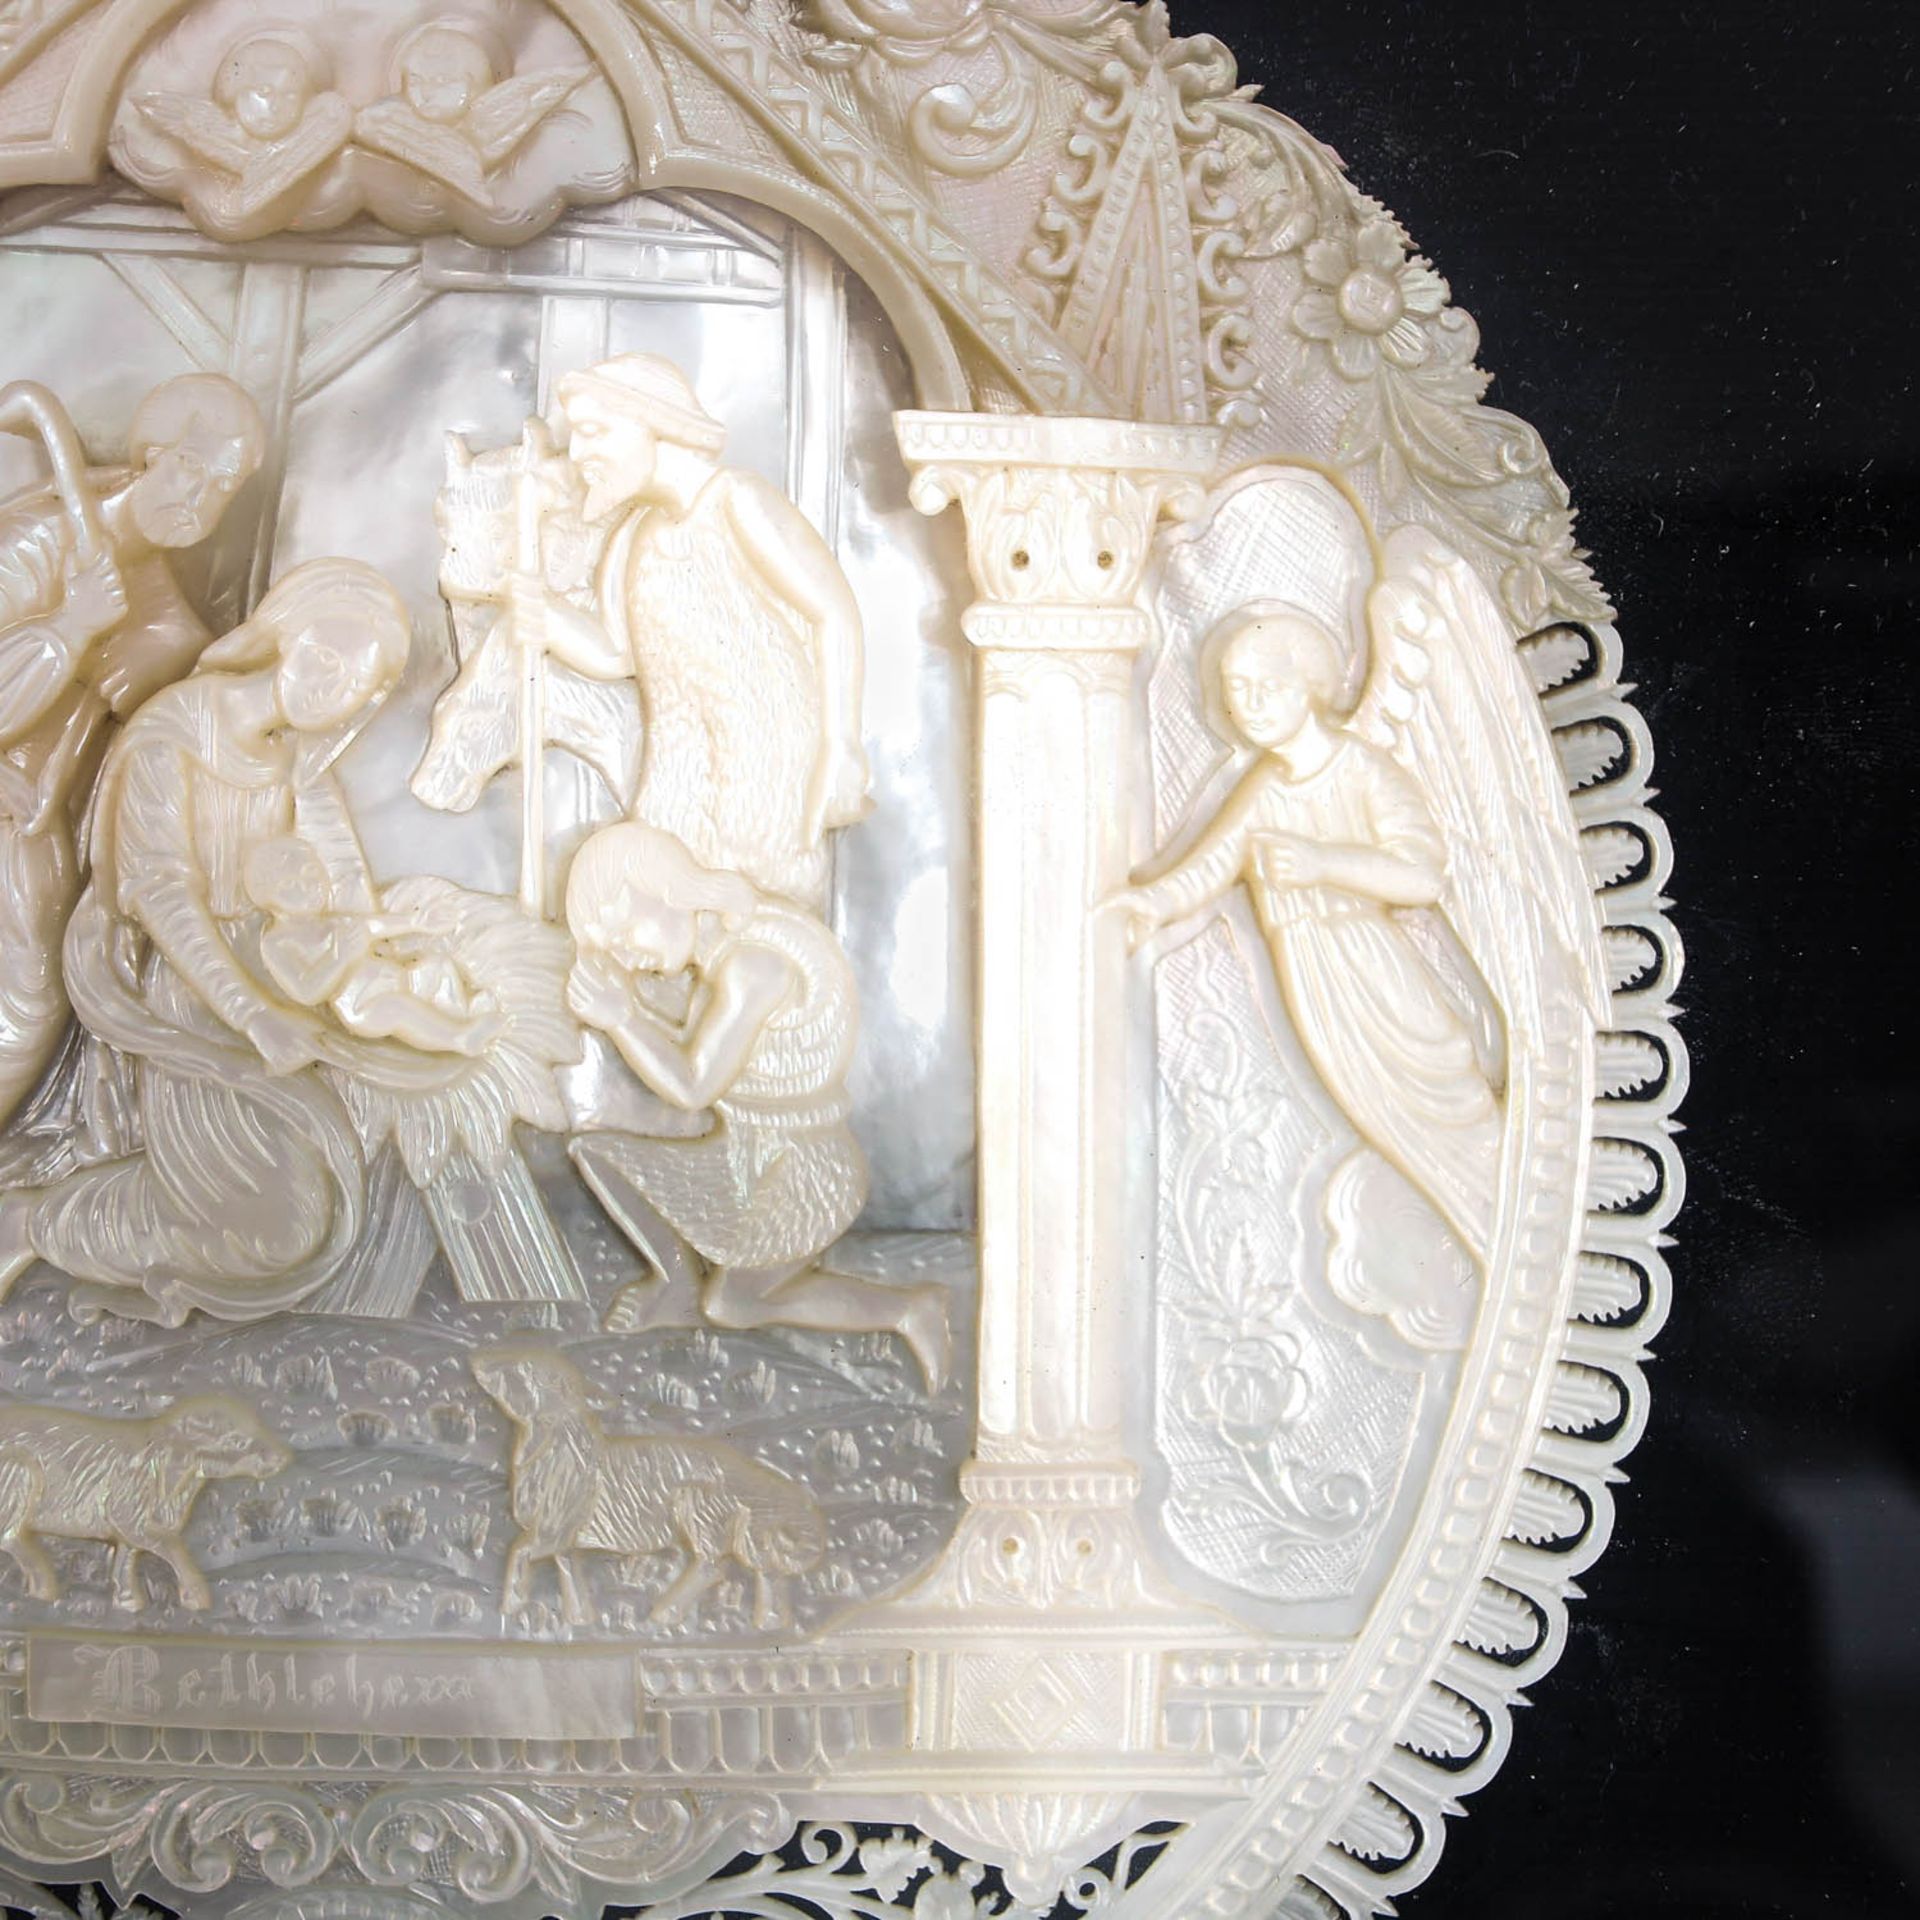 A Vitrine with Beautiful Religious Carving - Image 5 of 7